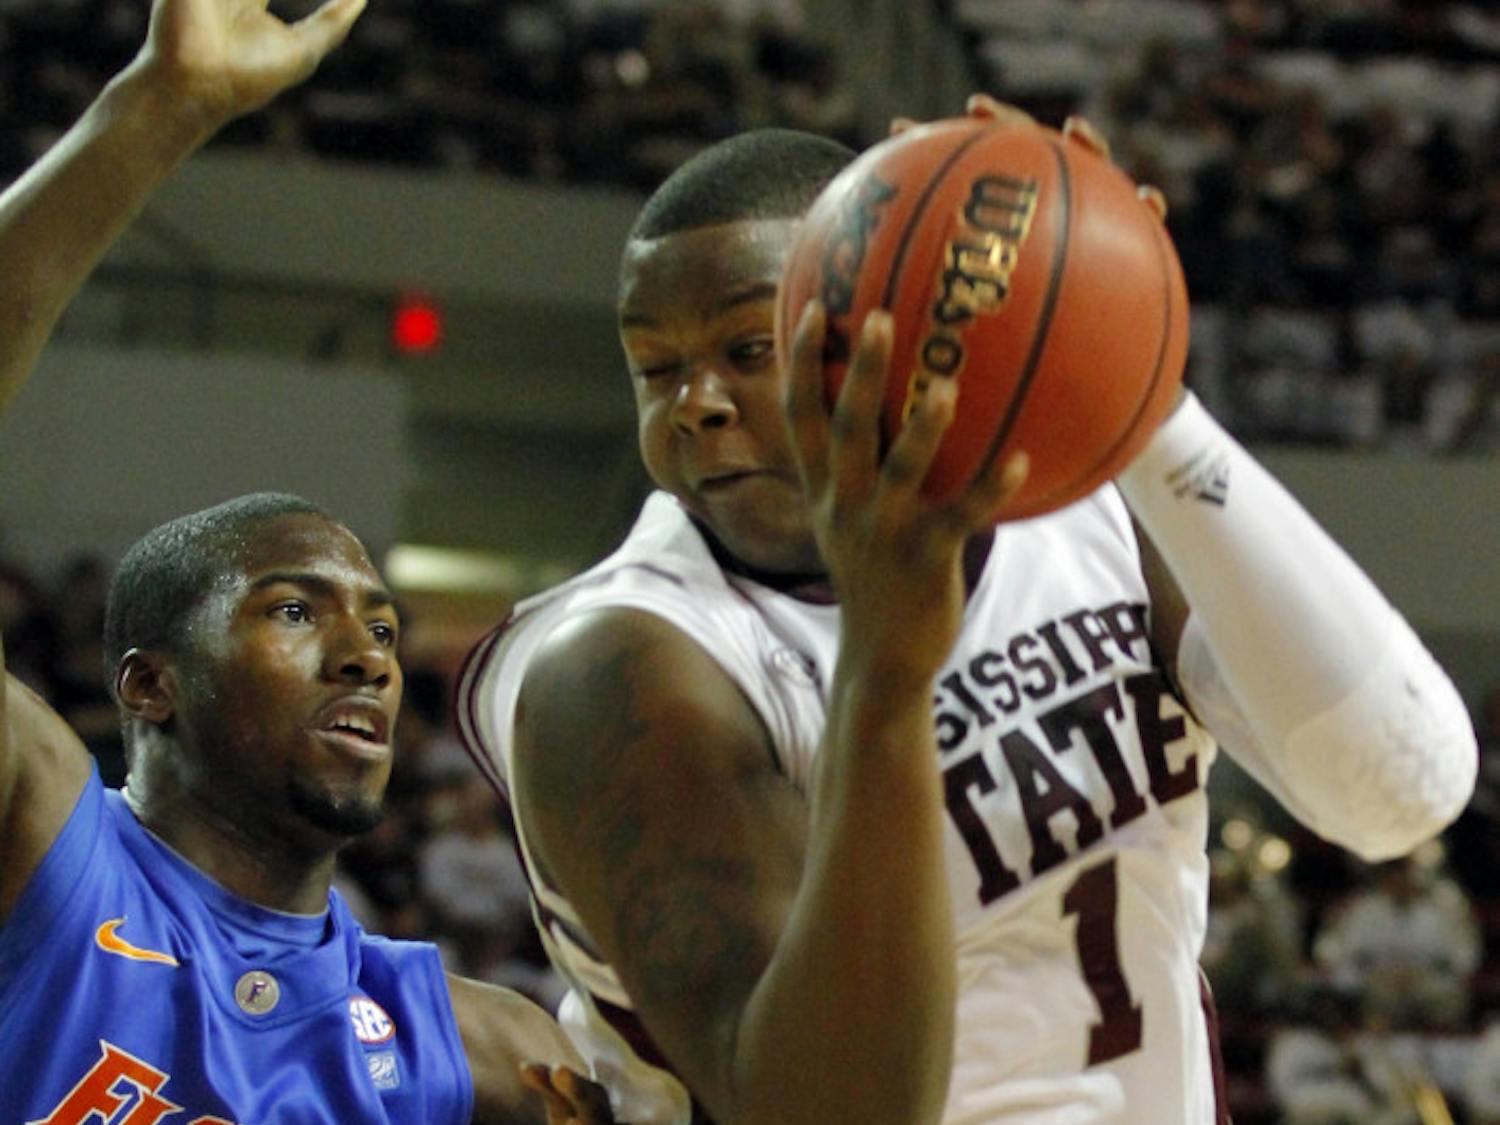 Mississippi State center Renardo Sidney scored 16 points and added eight rebounds in a 71-64 win for the Bulldogs.